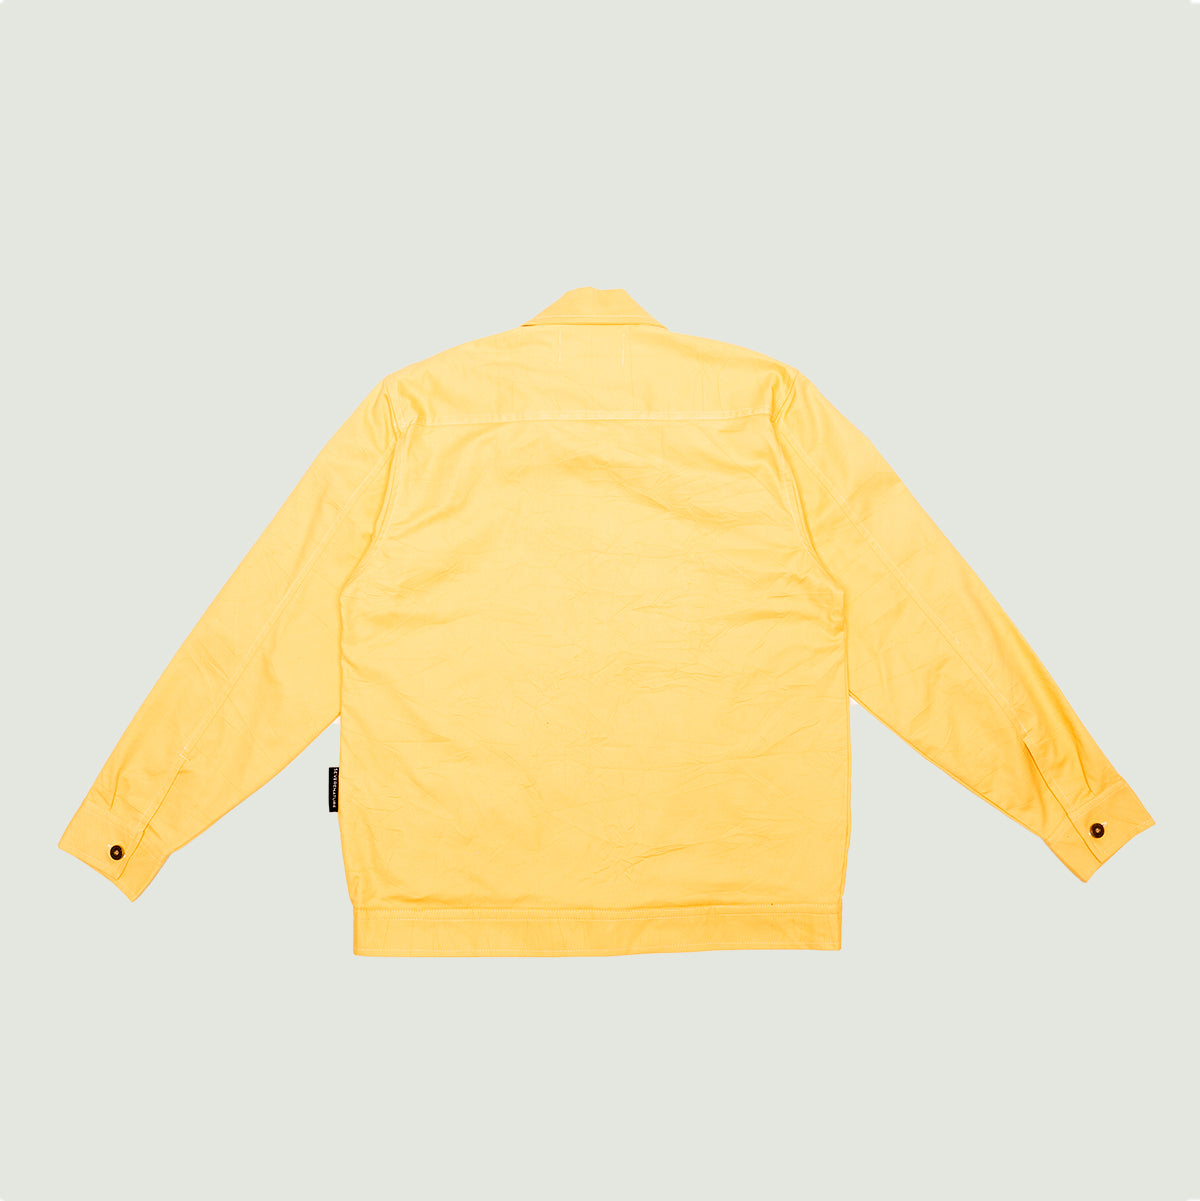 Bushman work butter-yellow jacket with patches